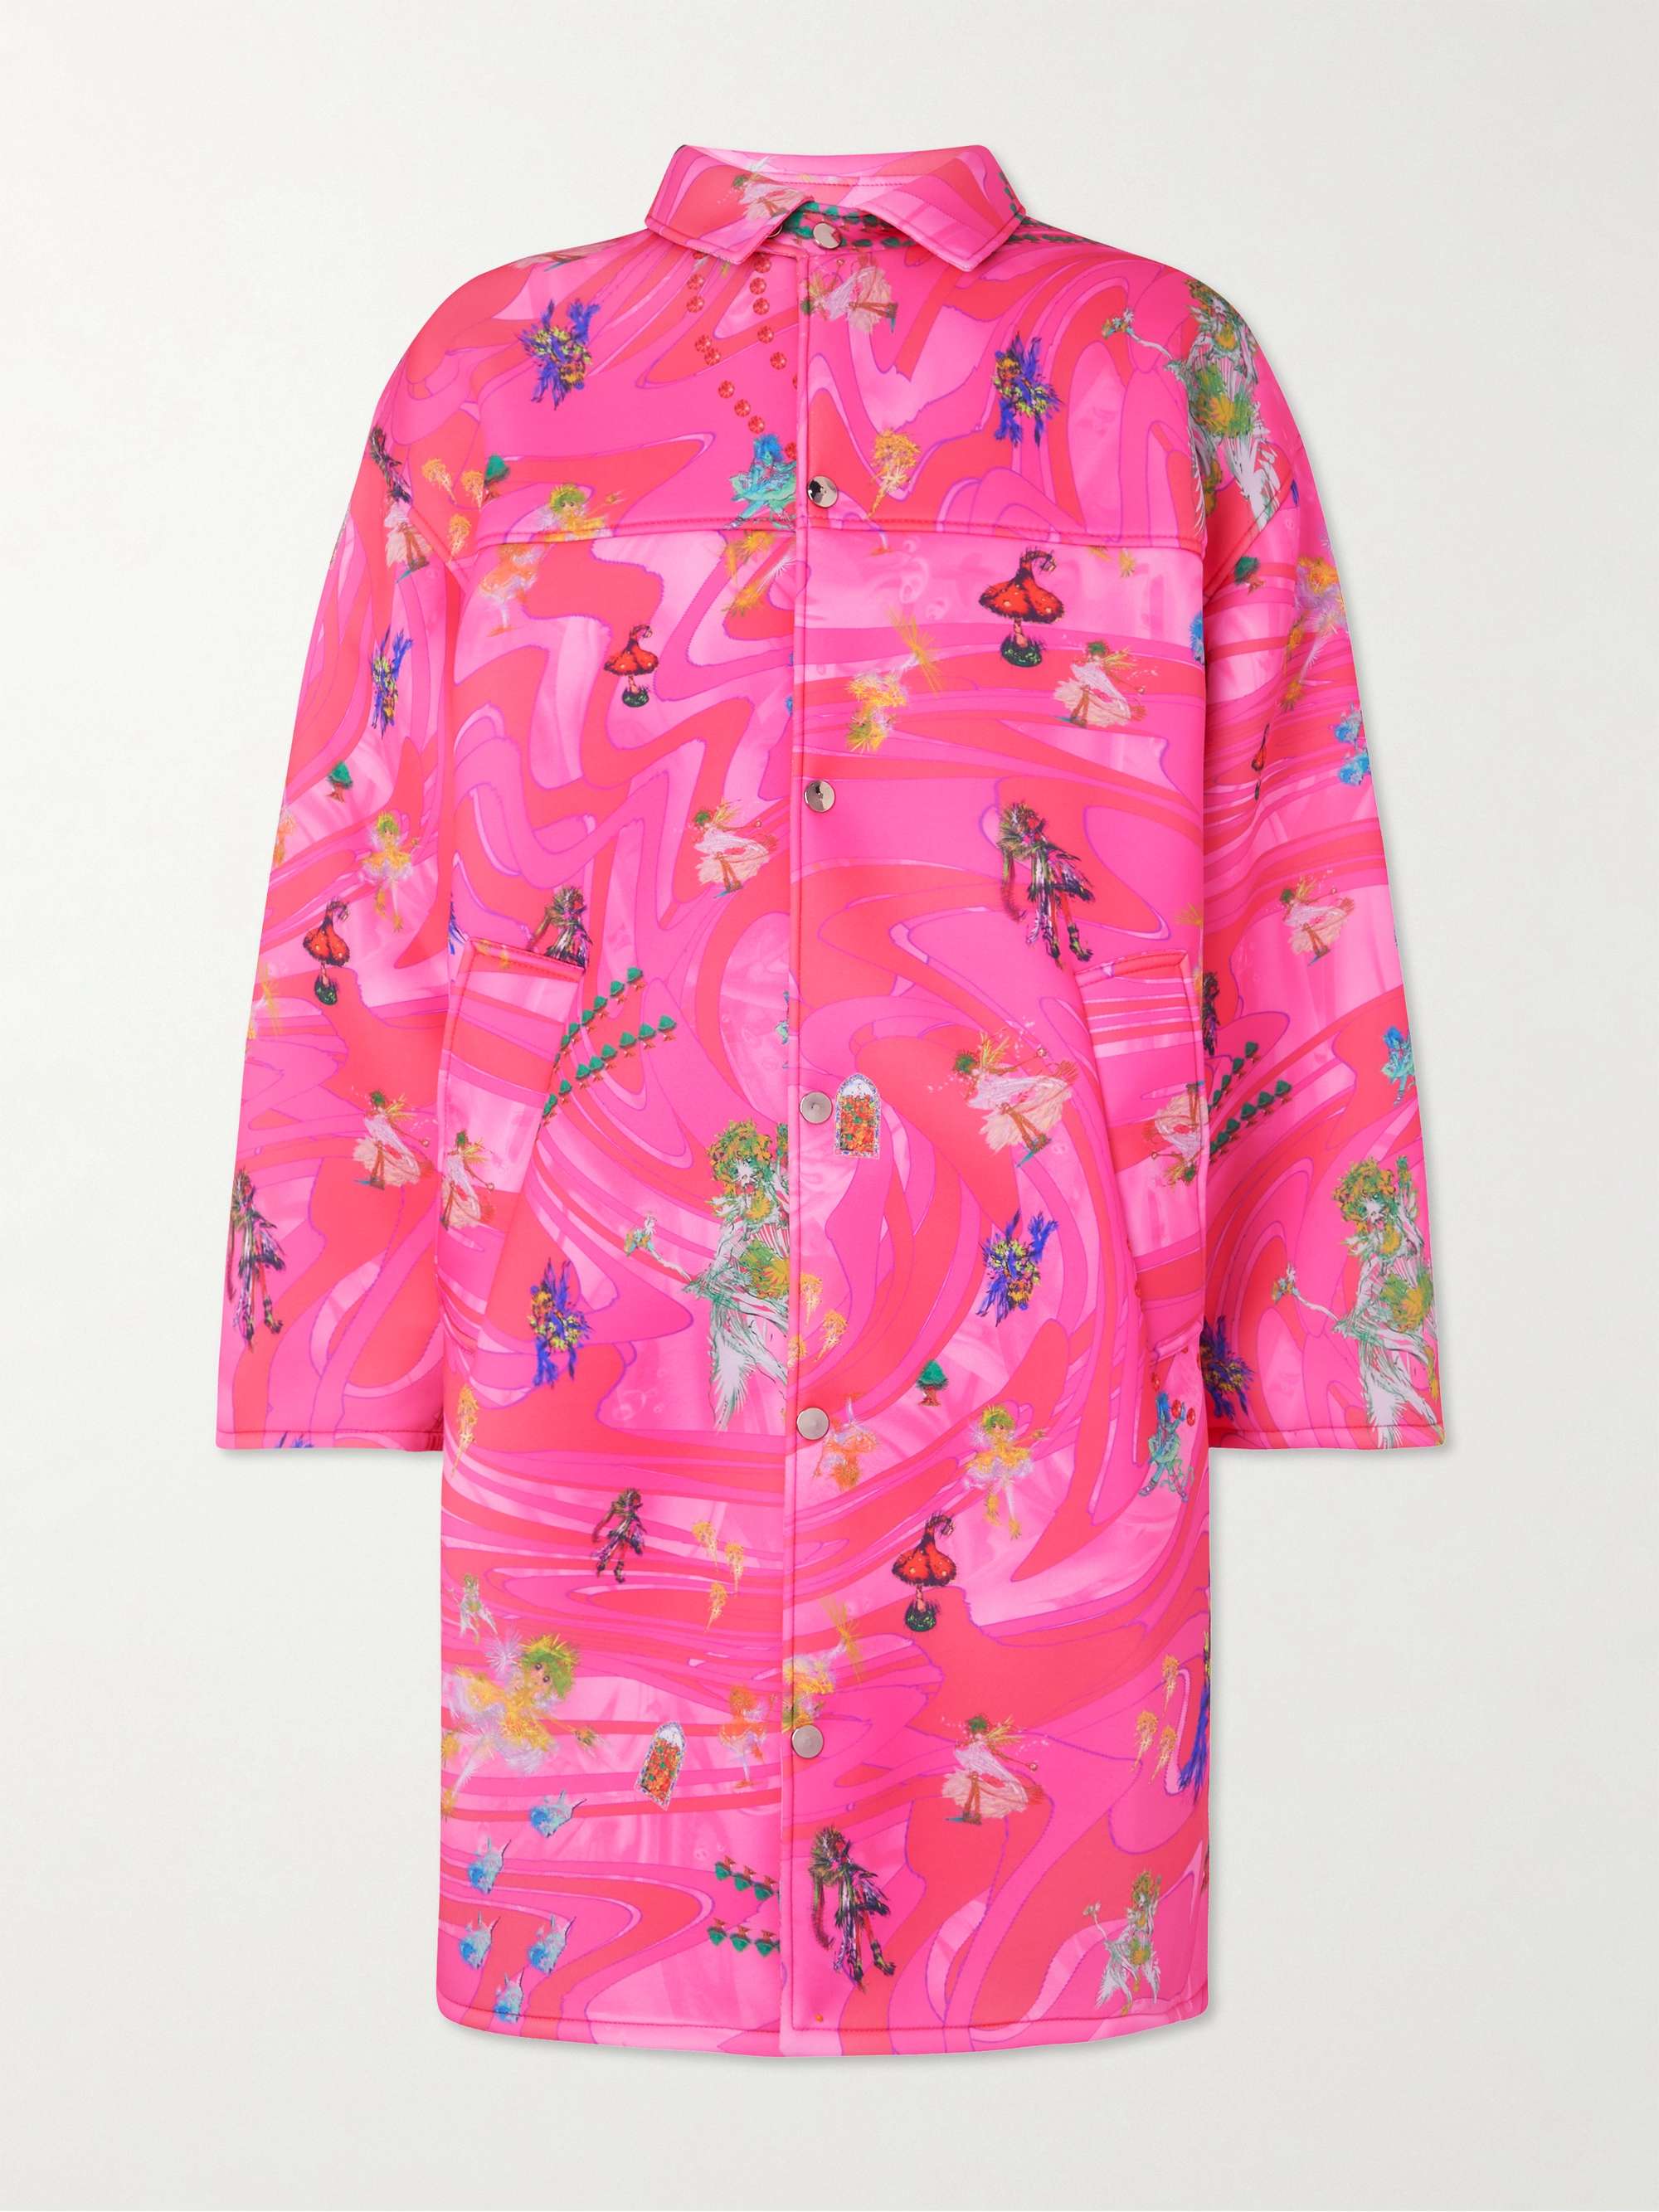 LIBERAL YOUTH MINISTRY Oversized Printed Scuba Coat